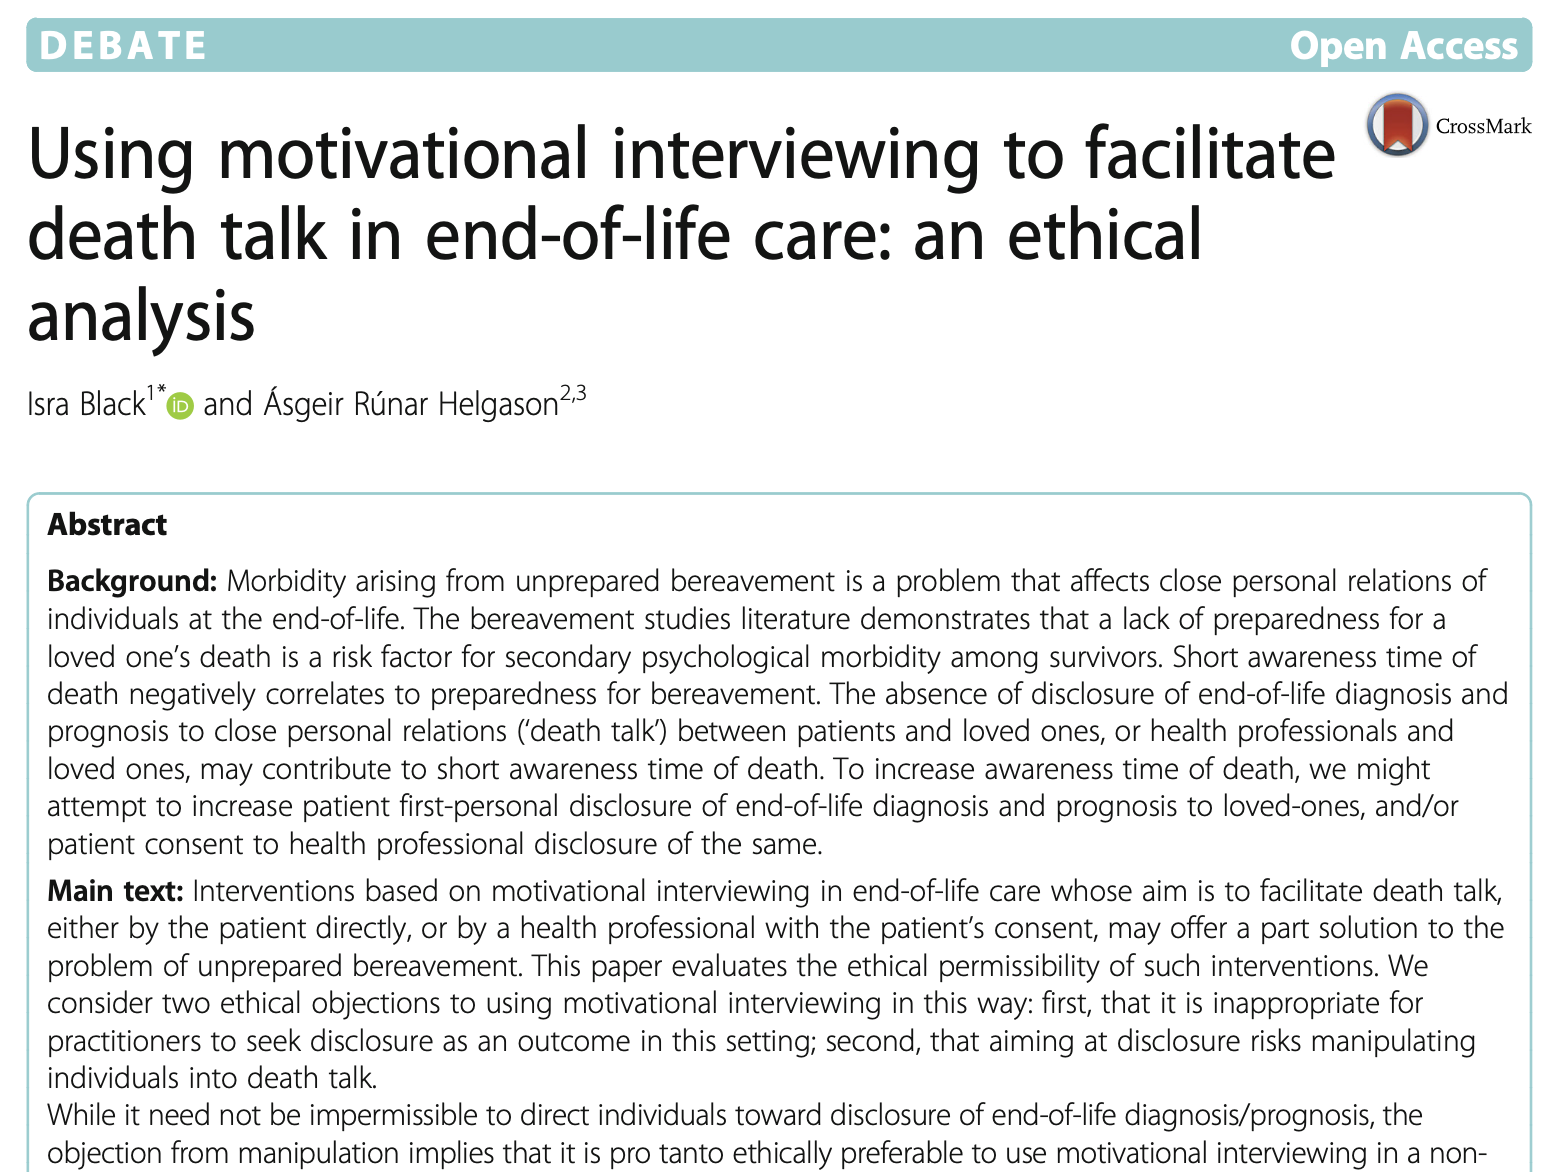 using motivational interviewing to facilitate death talk in end-of-life care